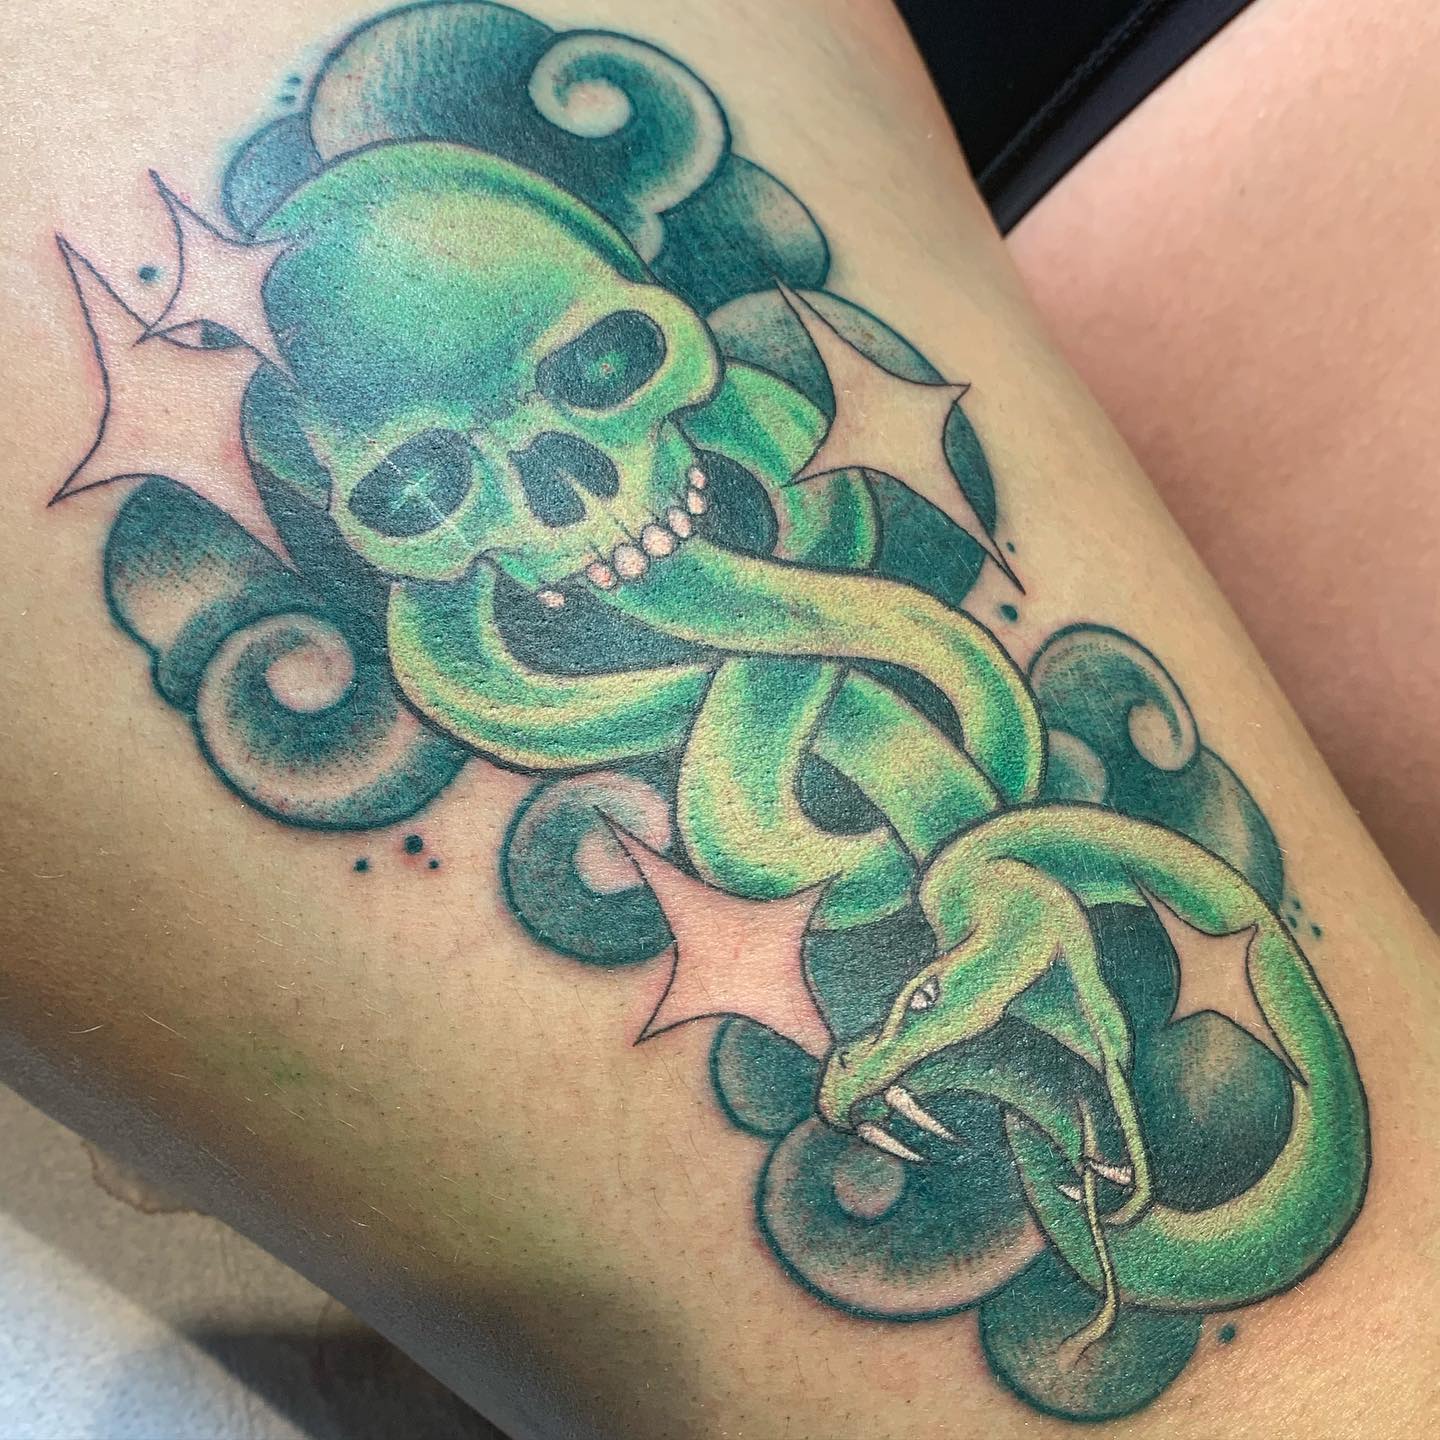 The green death eater tattoo is quite amazing! I think it's so cool that you've been able to take a concept from a fantasy book and turn it into something that's totally unique with a tattoo.